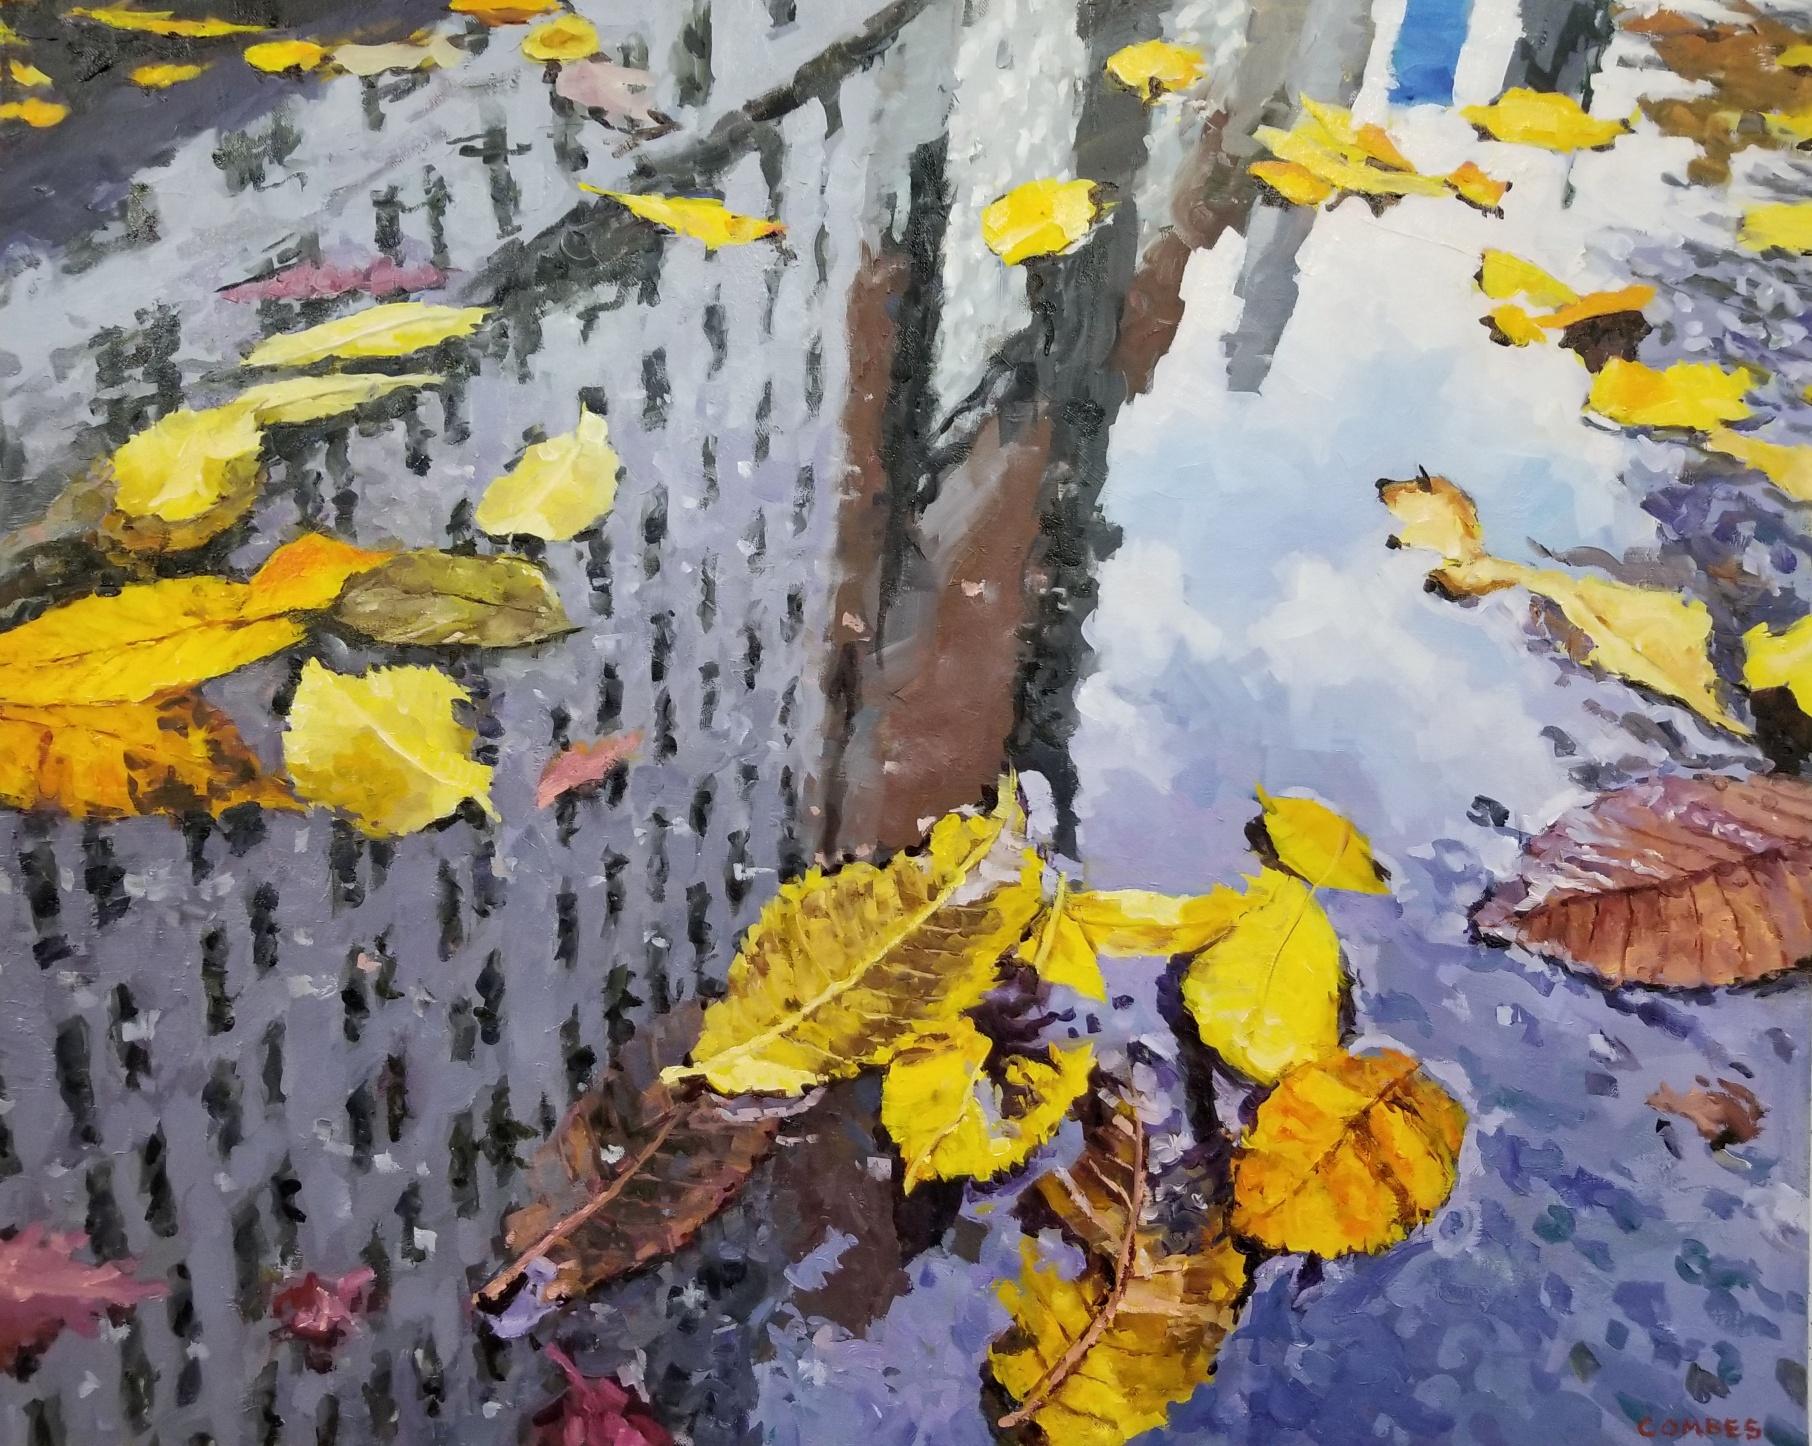 Richard Combes Landscape Painting - REFLECTION CENTRAL PARK SOUTH - Contemporary Realism / New York Citys / Autumn